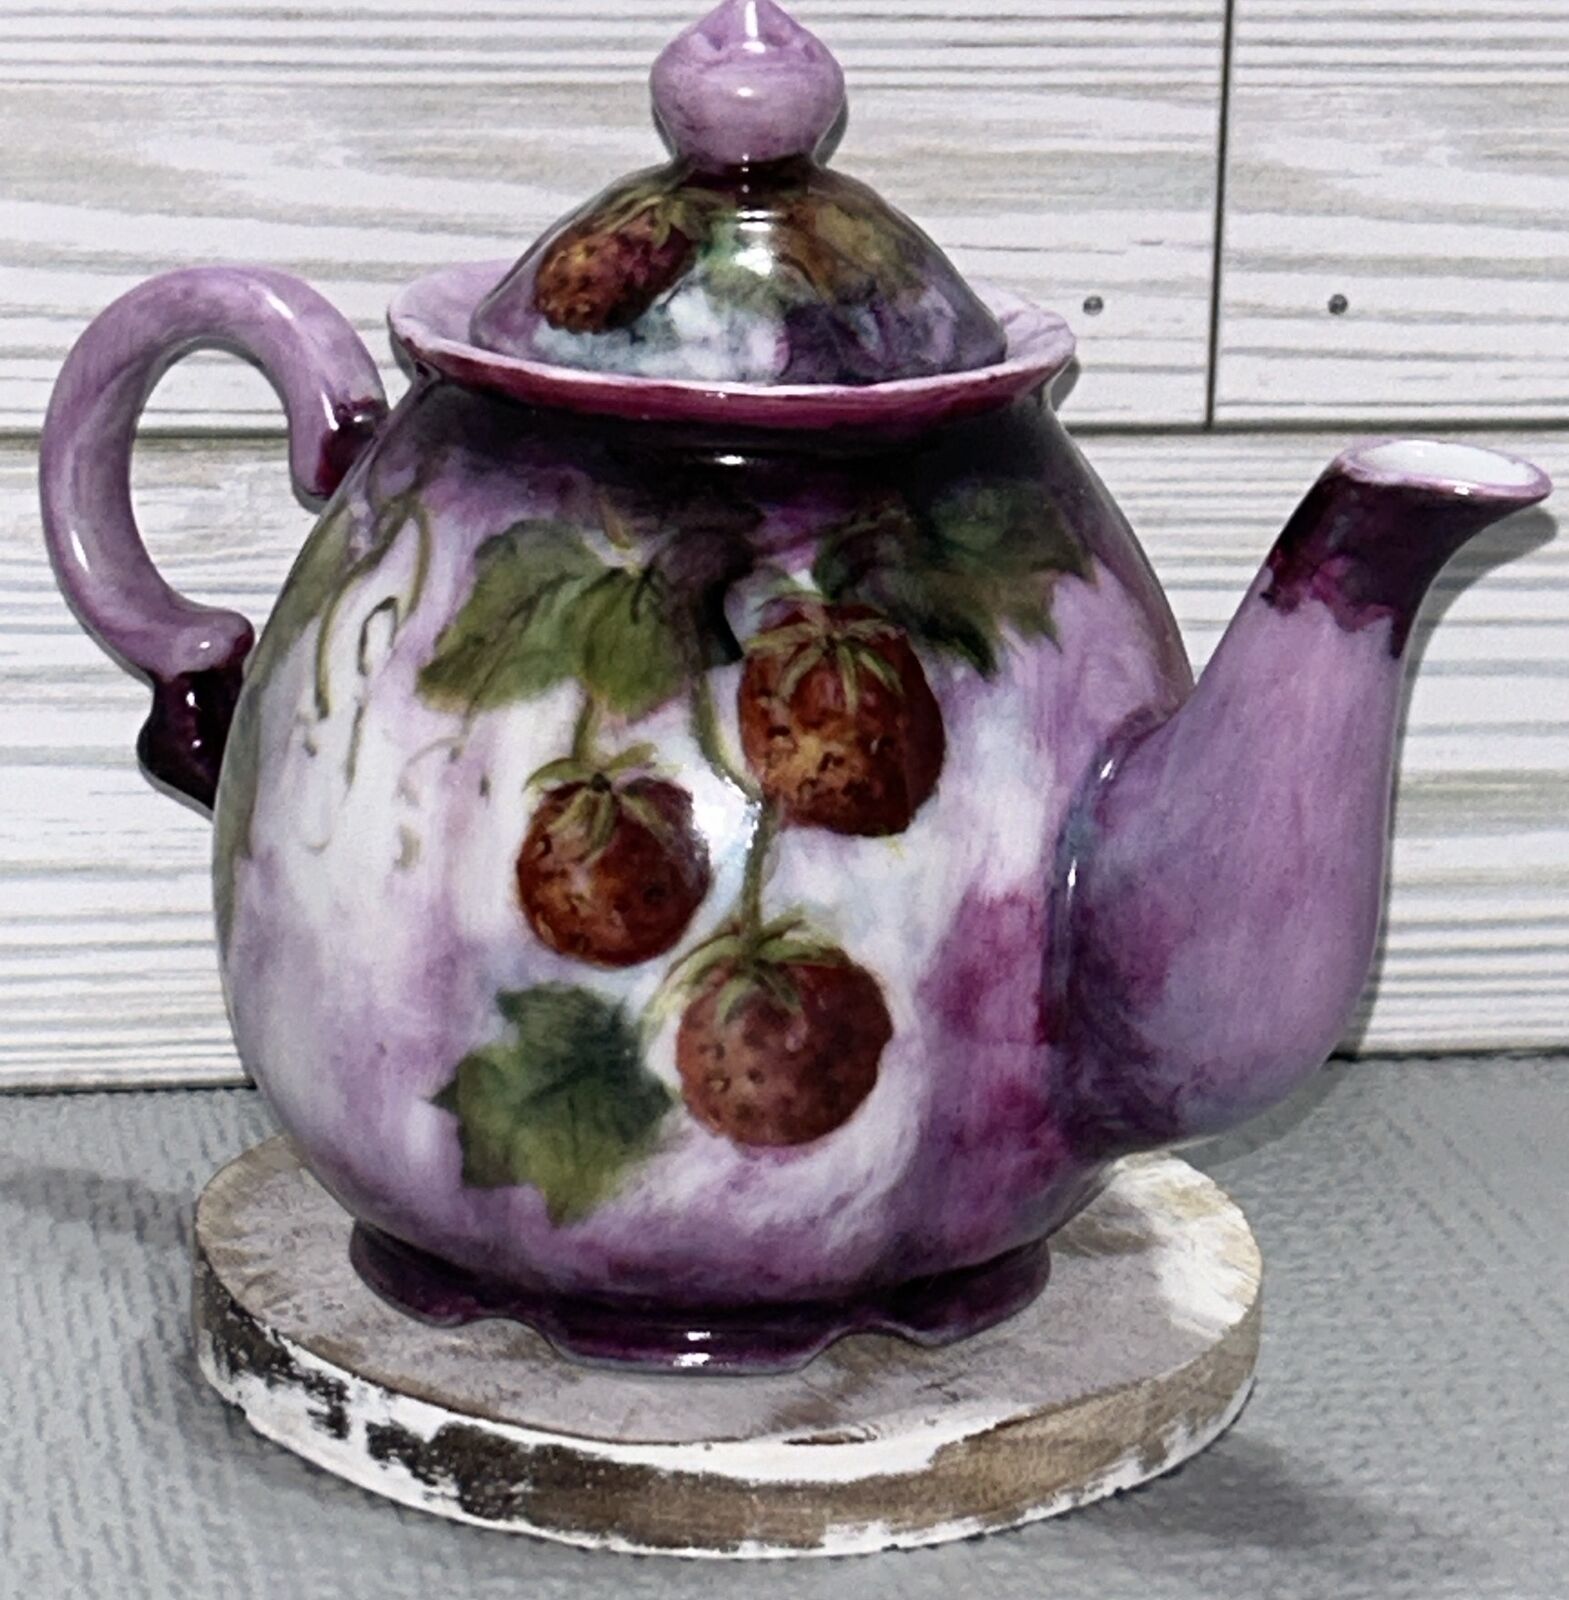 VTG 1999 Hand Painted Small Teapot Artist Signed Berries On Lavender Purple 5” T